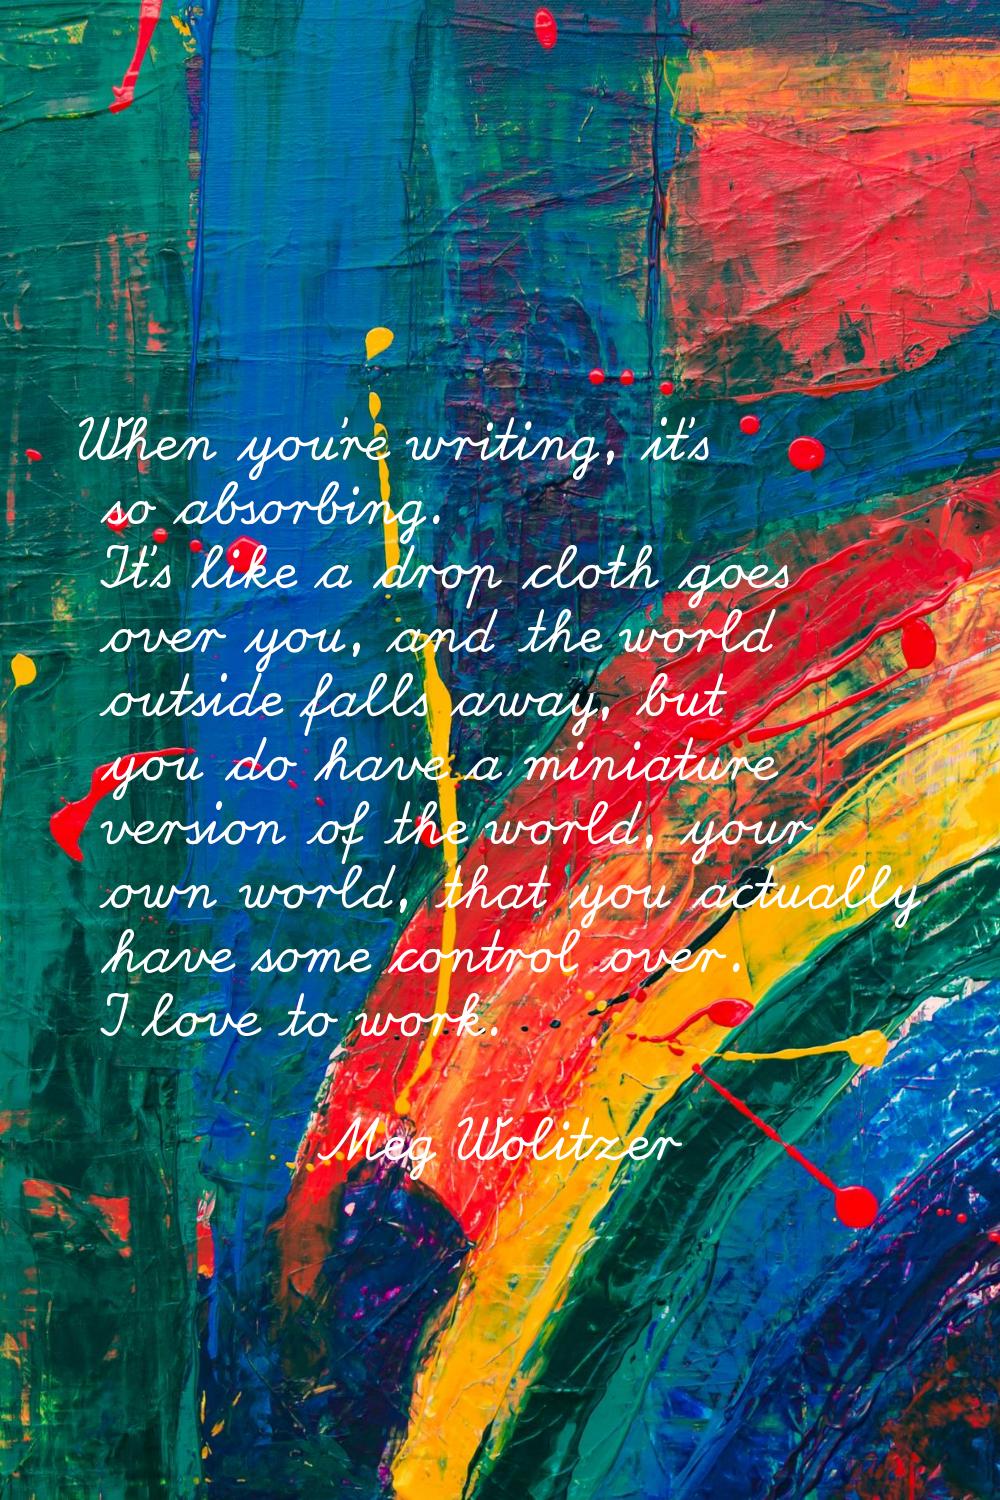 When you're writing, it's so absorbing. It's like a drop cloth goes over you, and the world outside